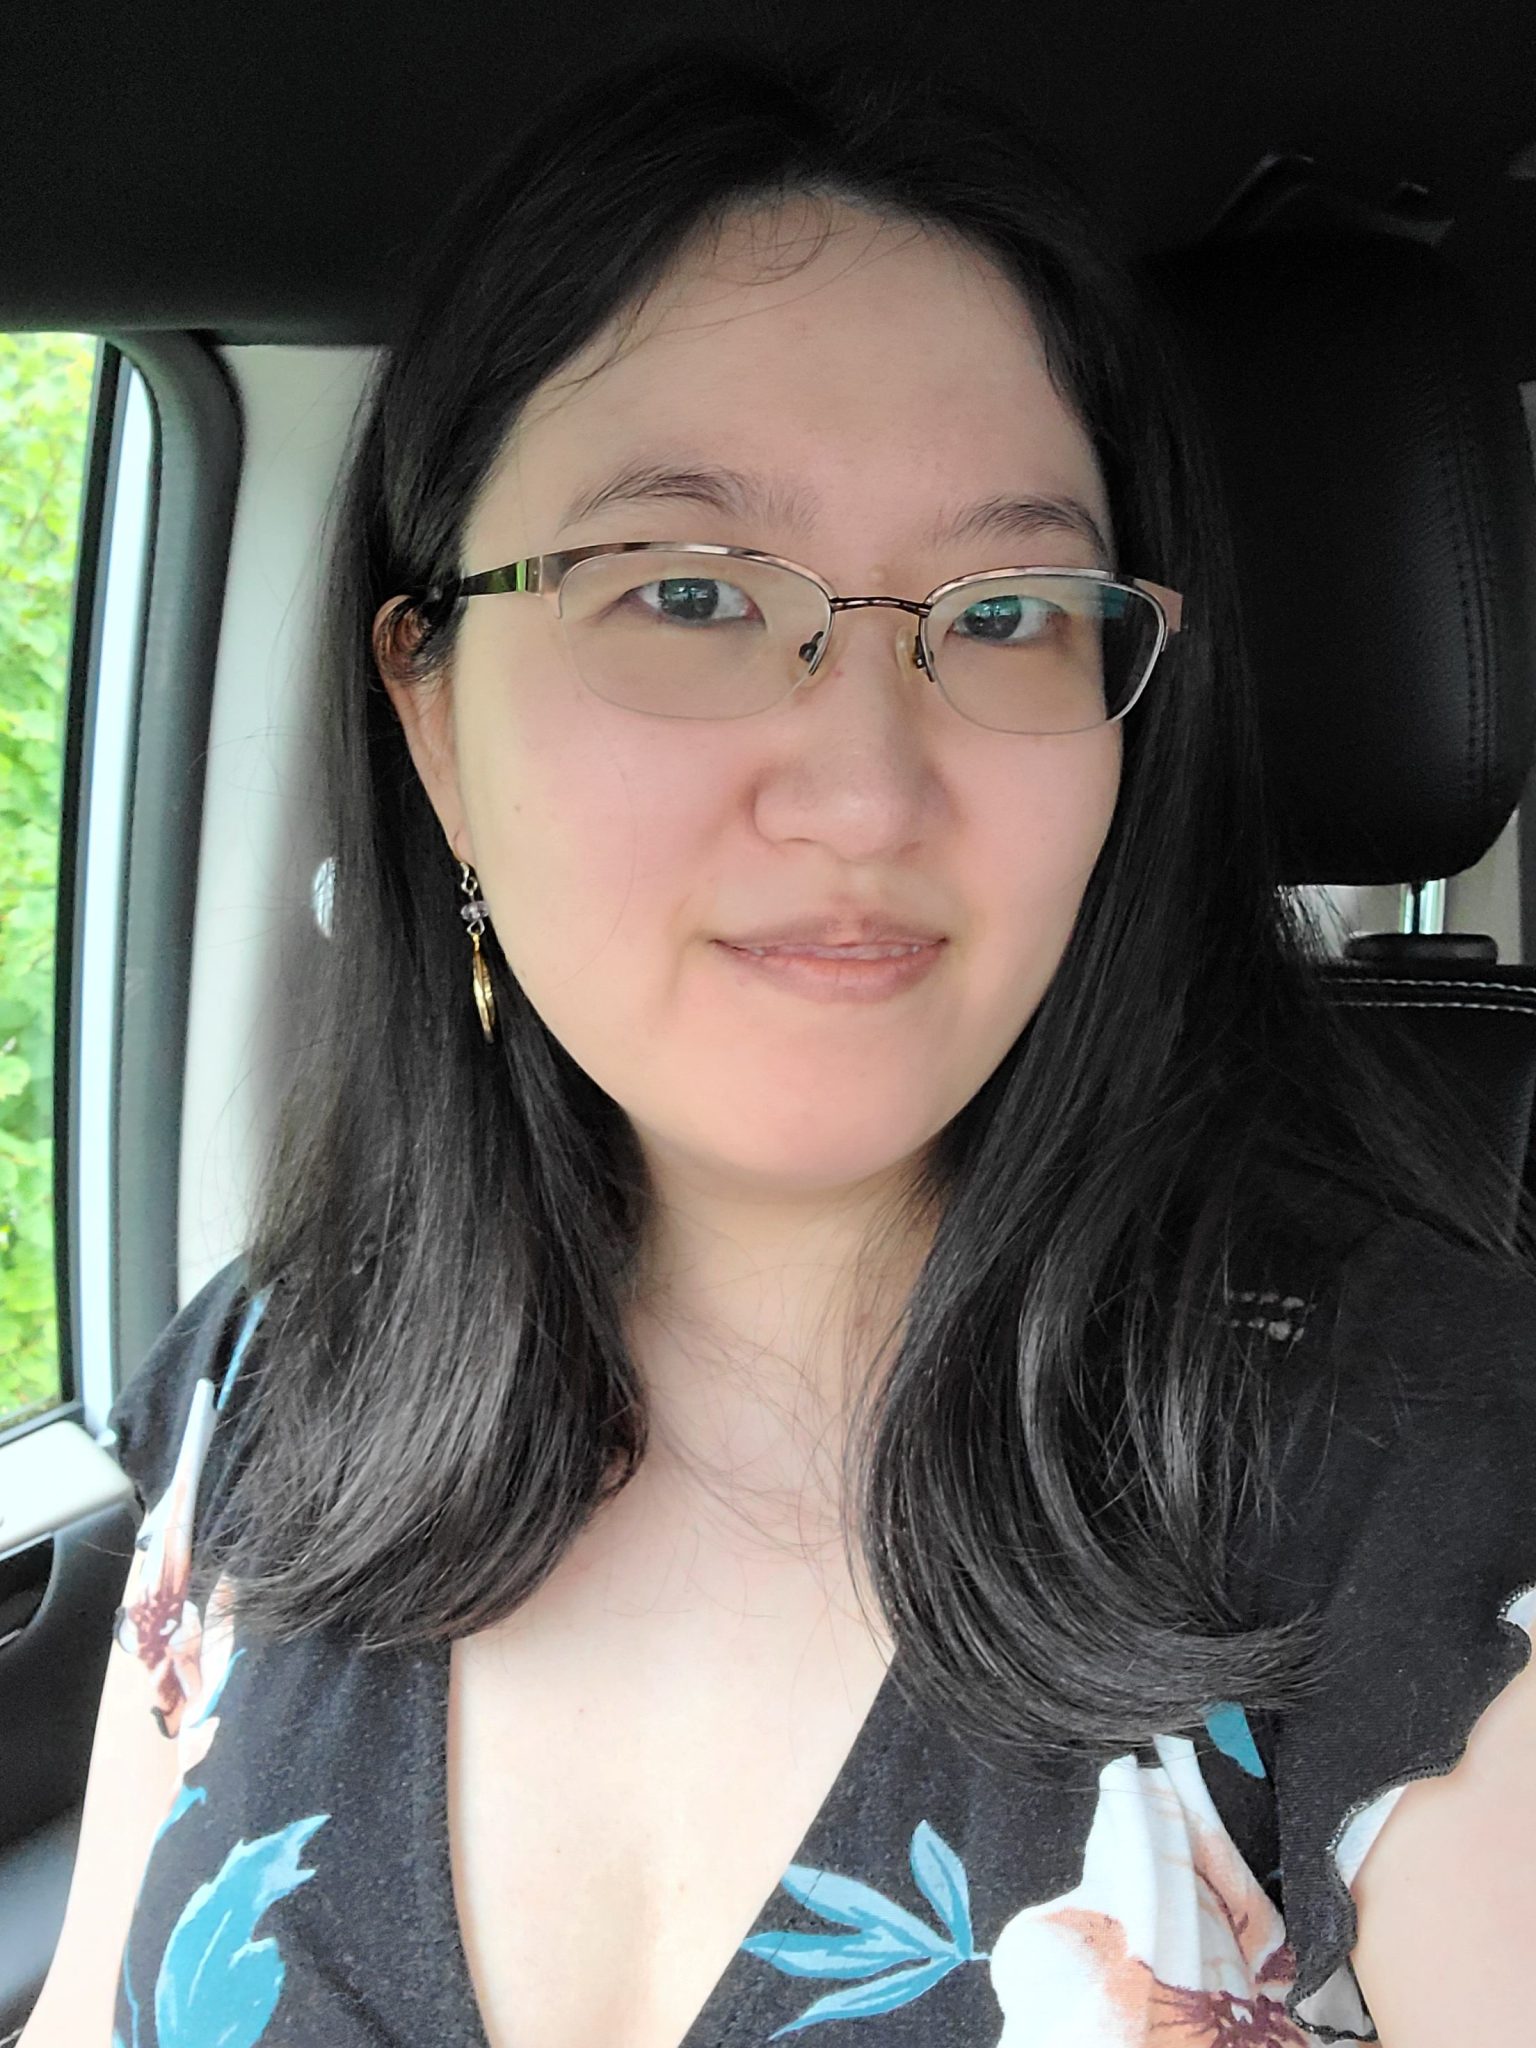  Kiyun Kim takes a selfie, smiling, in a car wearing a black, teal and peach floral top. They have shoulder length black hair and wear glasses.